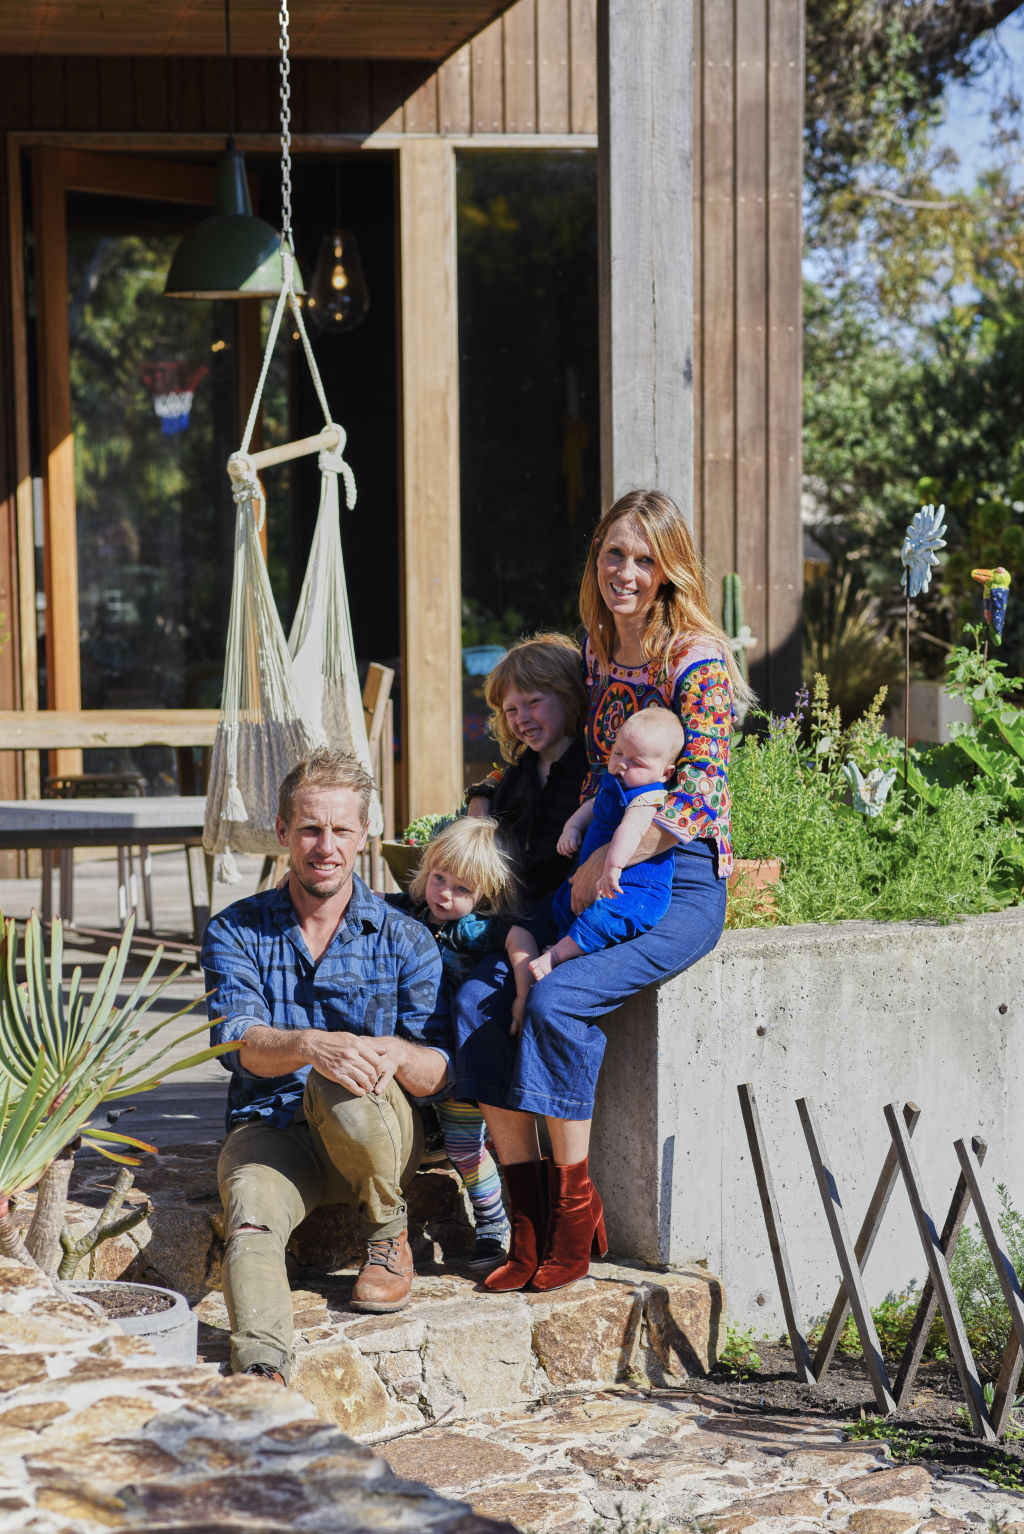 'Our backyard has been turned into a total adventure playground for the family.' Photo: Supplied